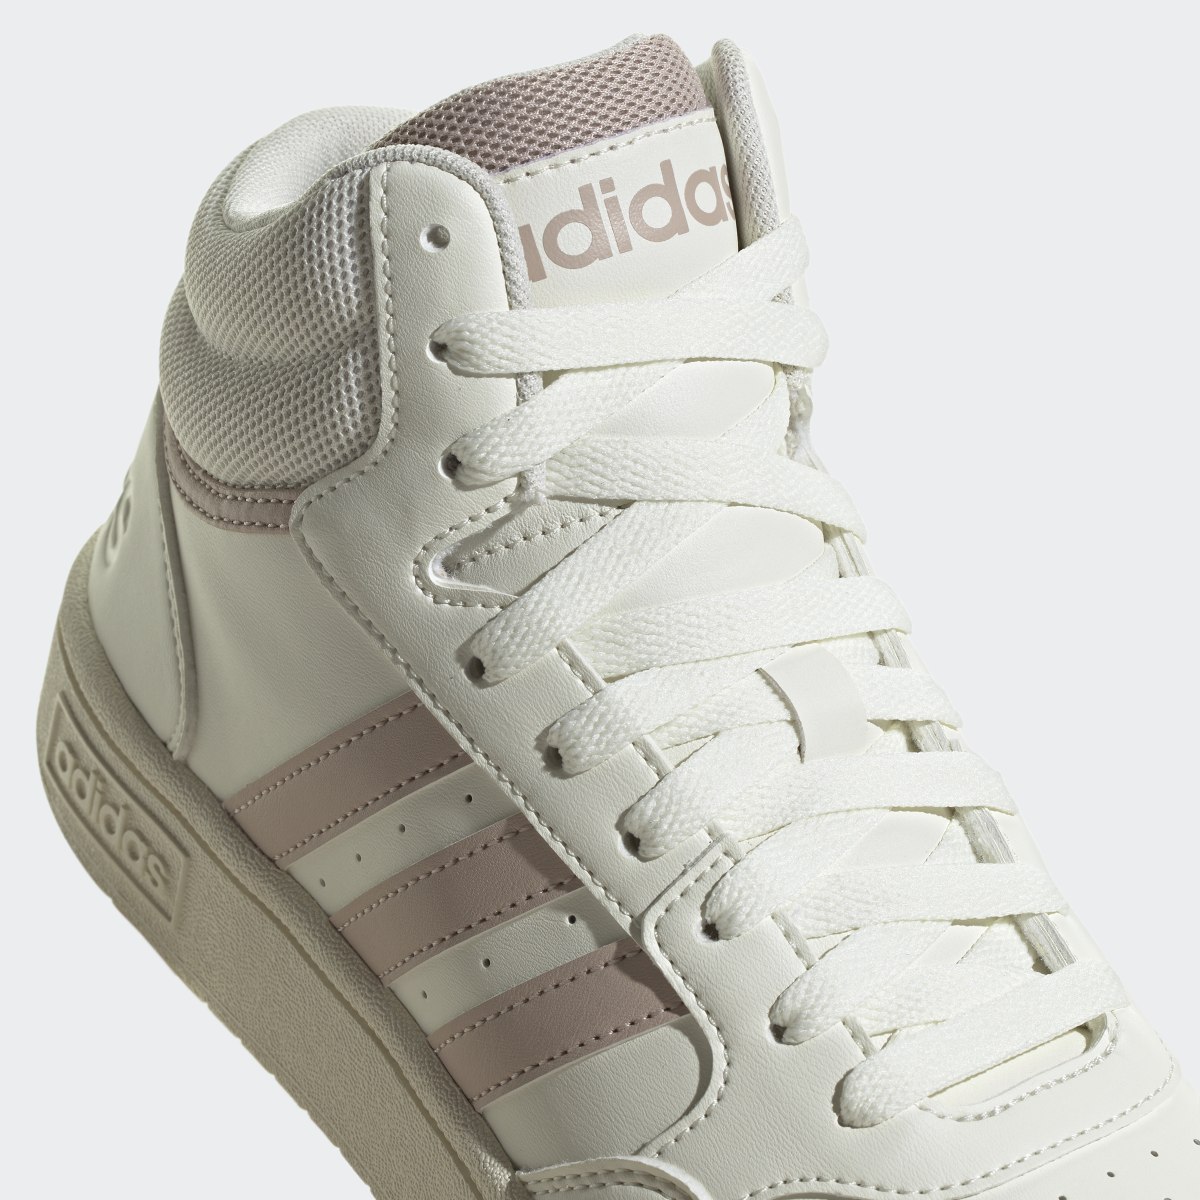 Adidas Hoops 3.0 Mid Classic Shoes. 10